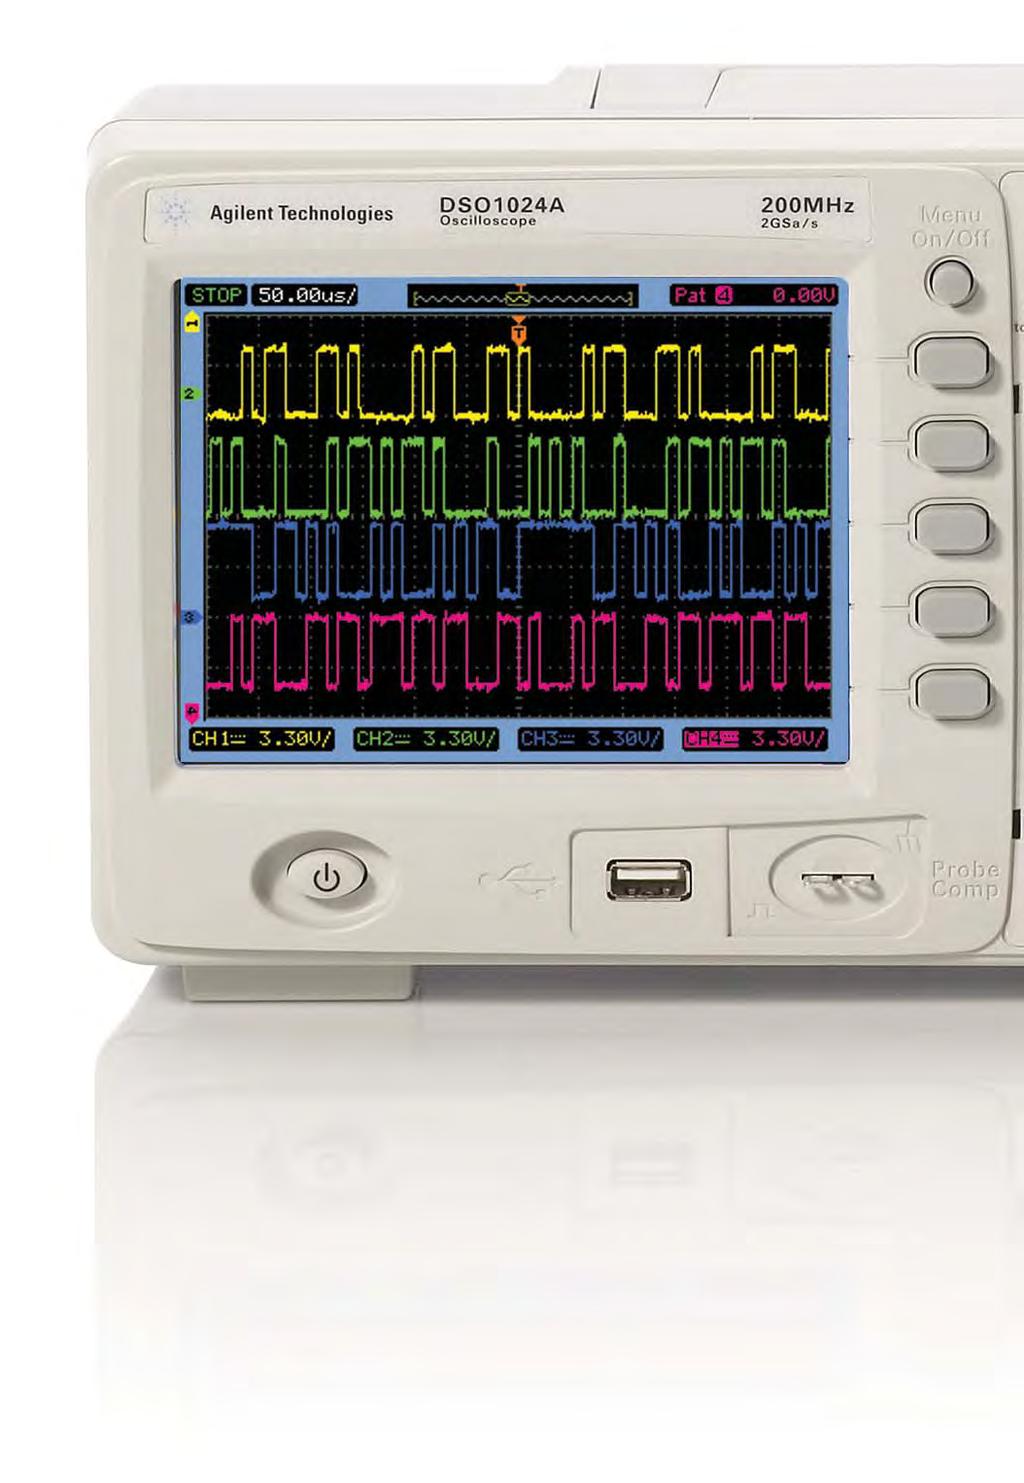 Agilent 1000 Series portable oscilloscopes: Engineered to give you more scope than you thought you could afford More signal viewing Turn menu off for almost 25% more viewing